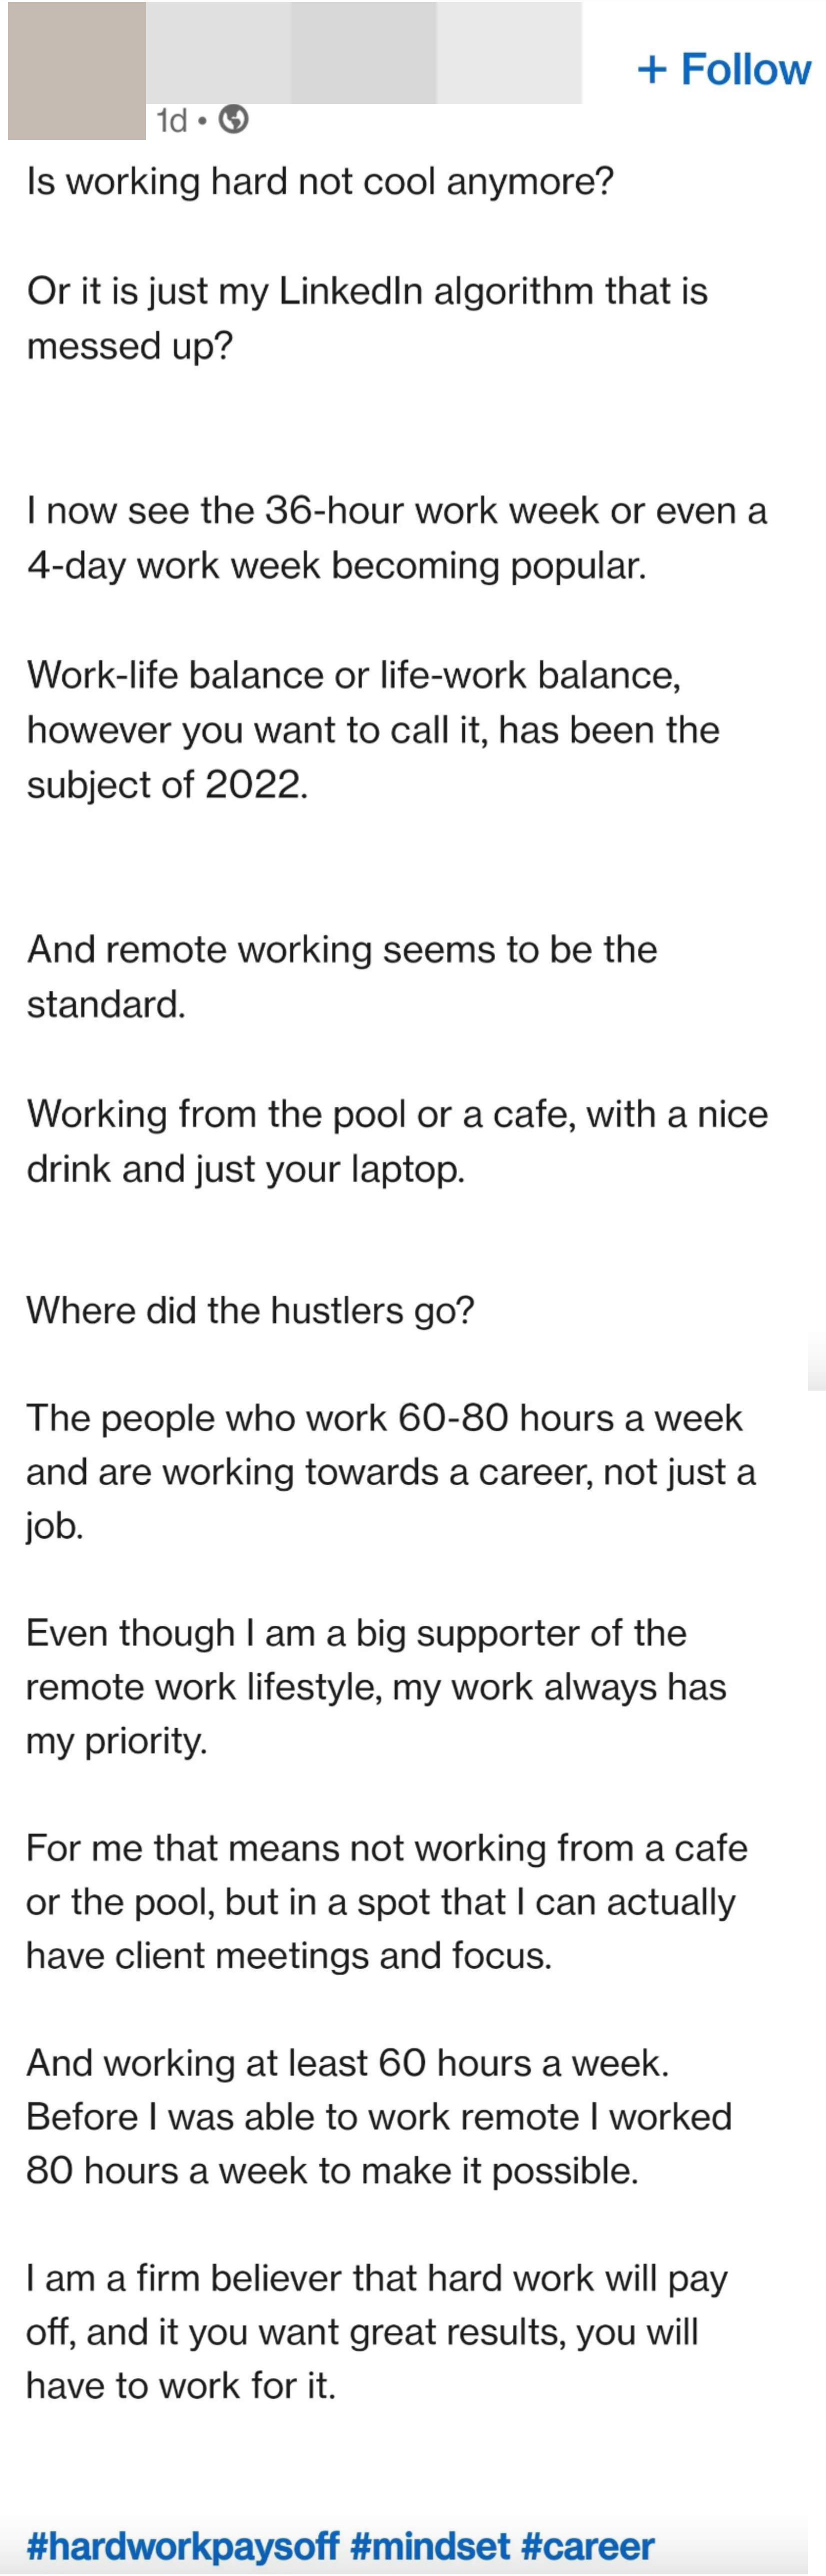 Screenshot of someone saying they work 60 to 80 hours a week